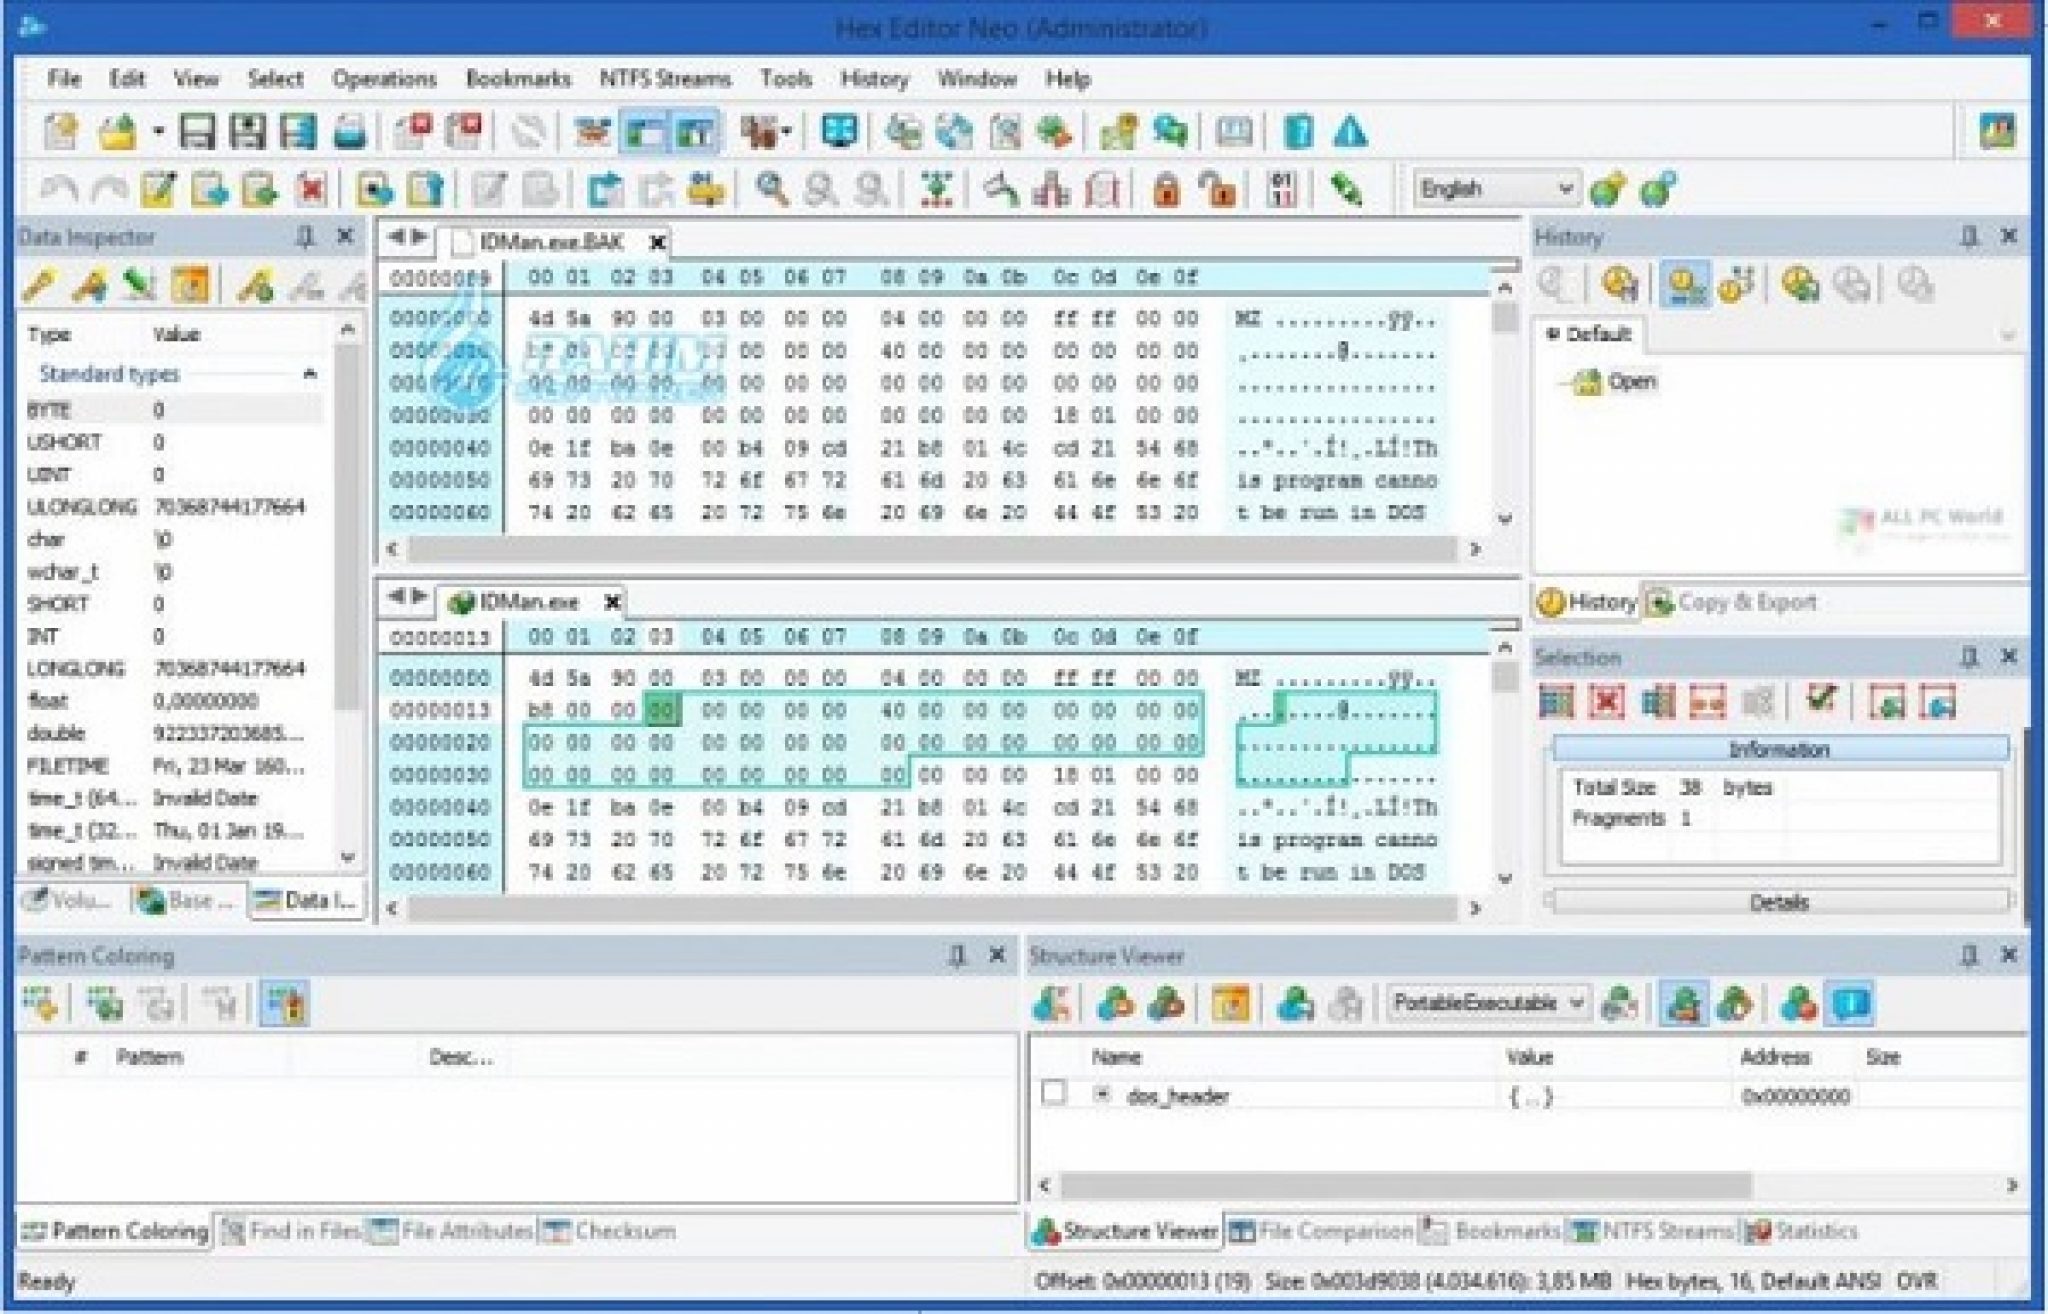 Hex Editor Neo 7.37.00.8578 instal the last version for ios